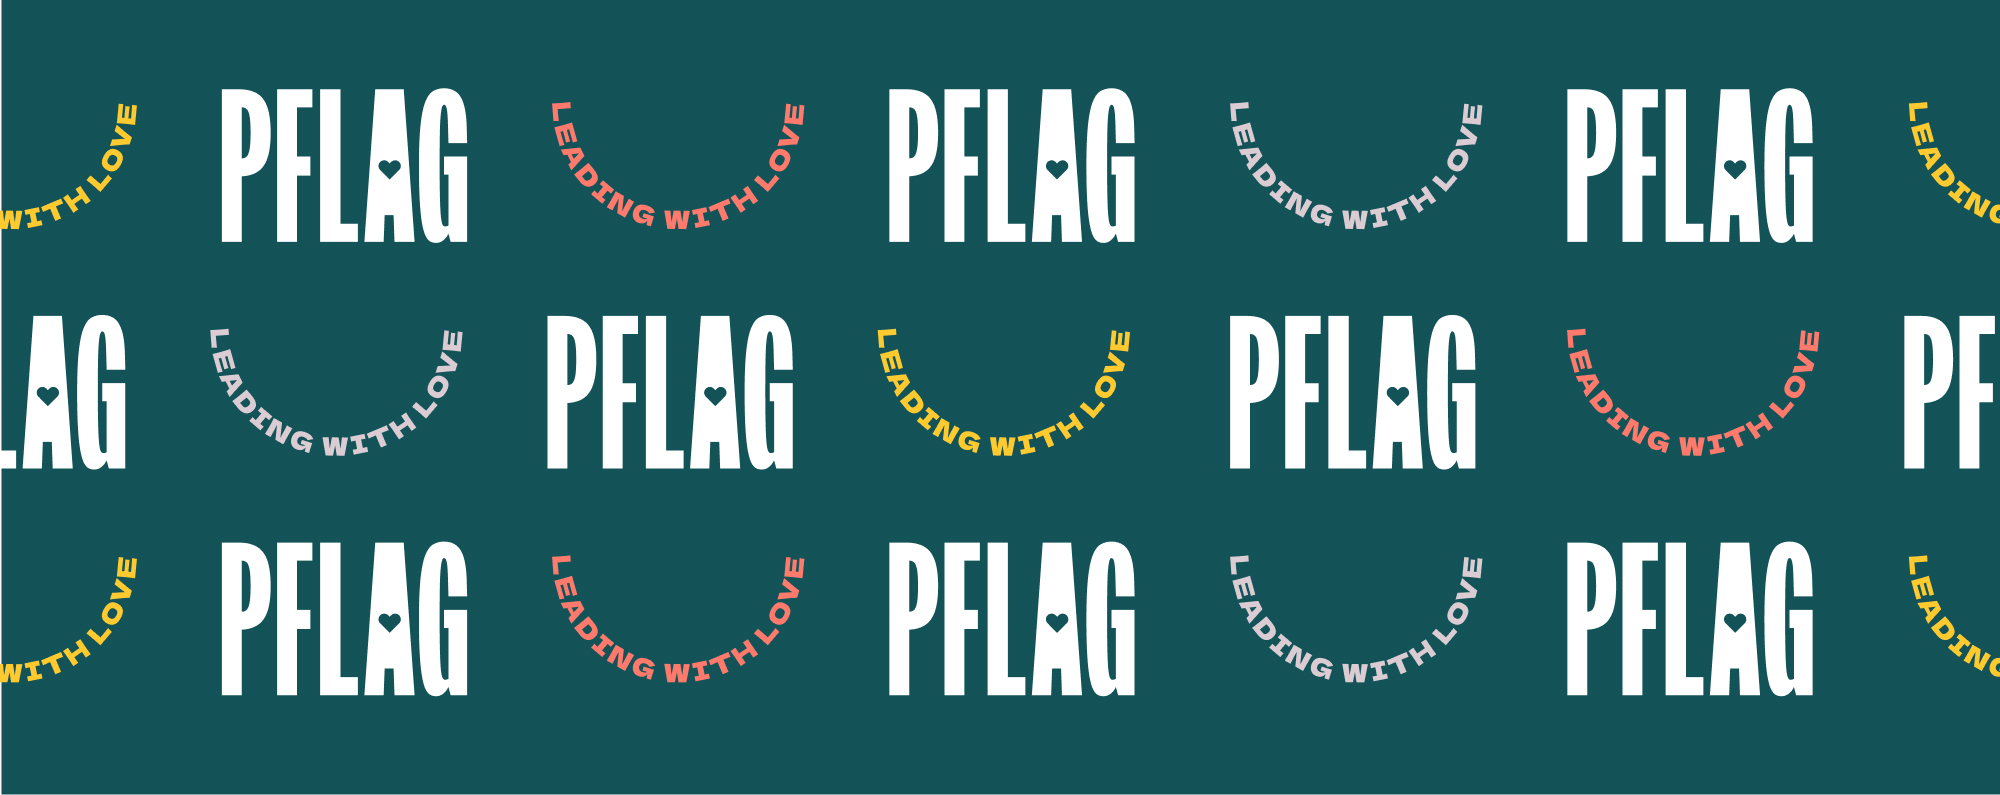 Pattern with PFLAG logo and tagline on dark green